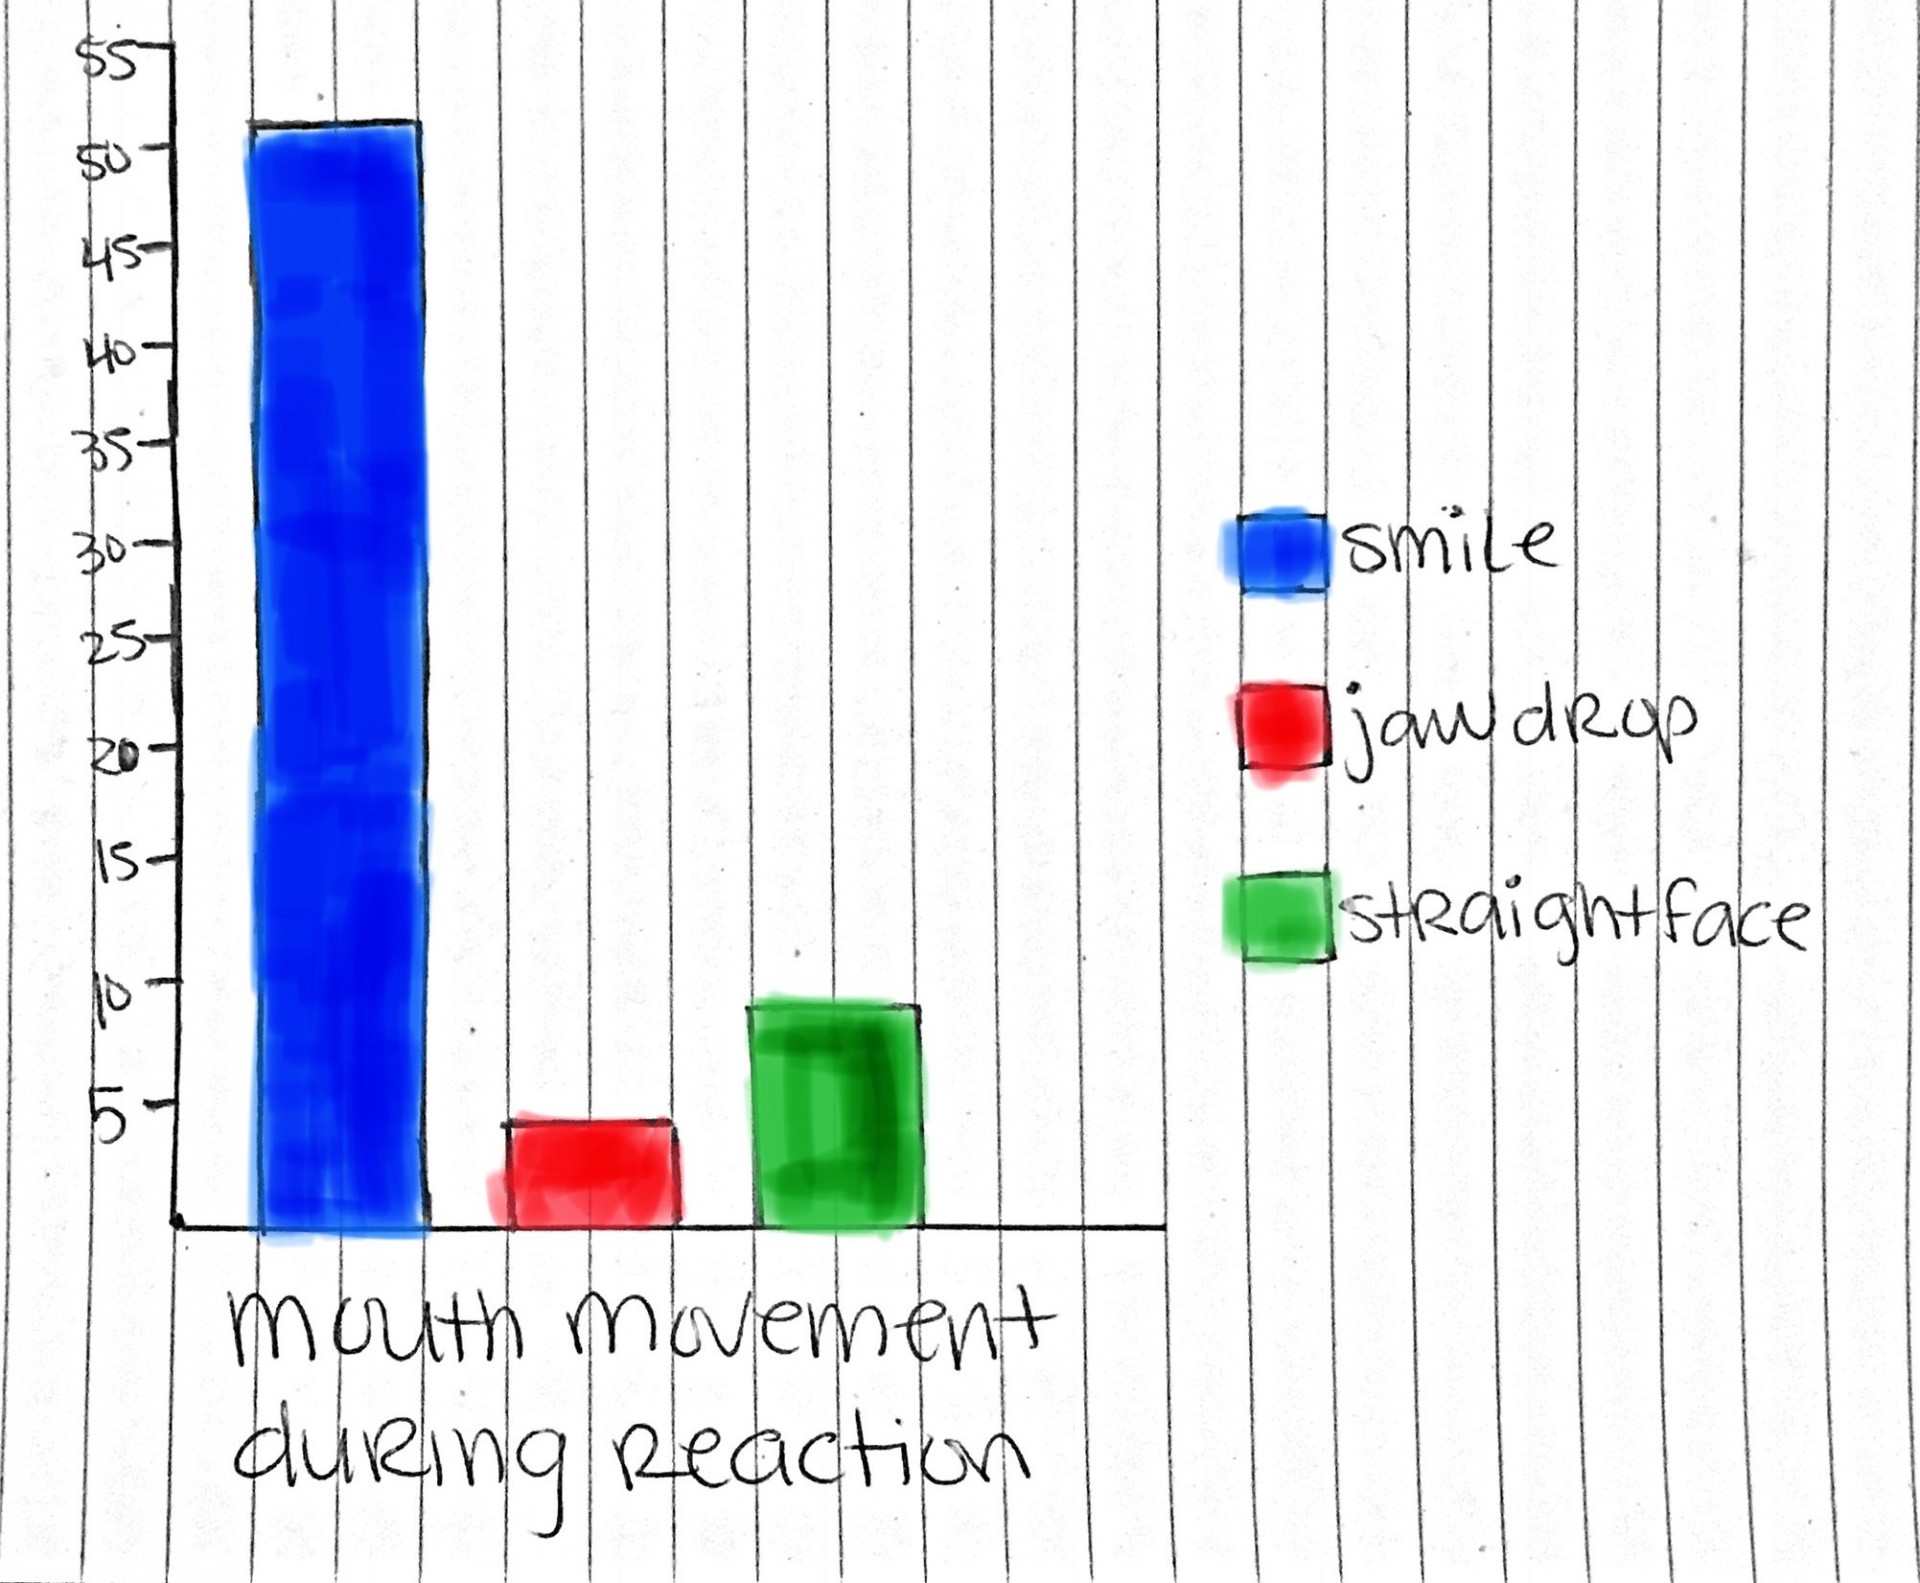 mouth movement during reaction